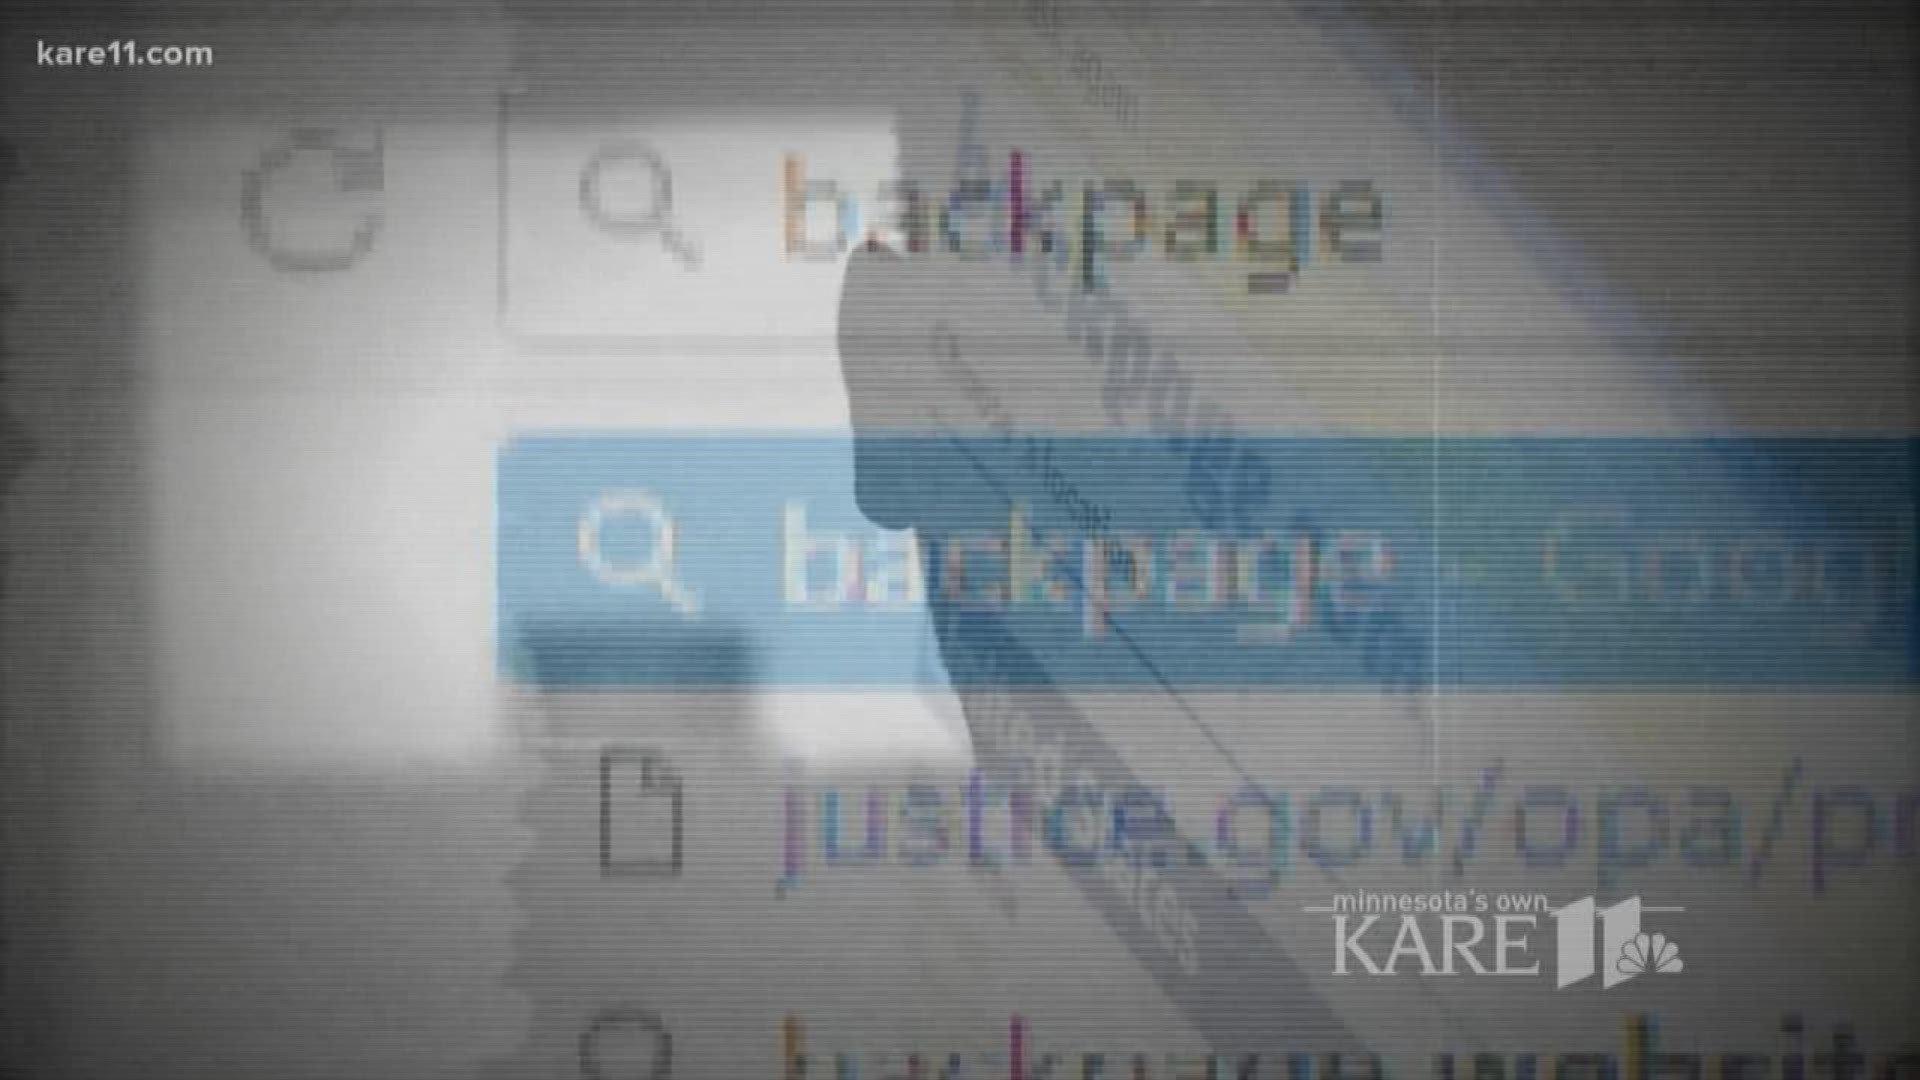 CEO Carl Ferrer also agreed Thursday to testify in ongoing prosecutions against others at the site that authorities have dubbed a lucrative nationwide "online brothel."  https://kare11.tv/2HmNCbi